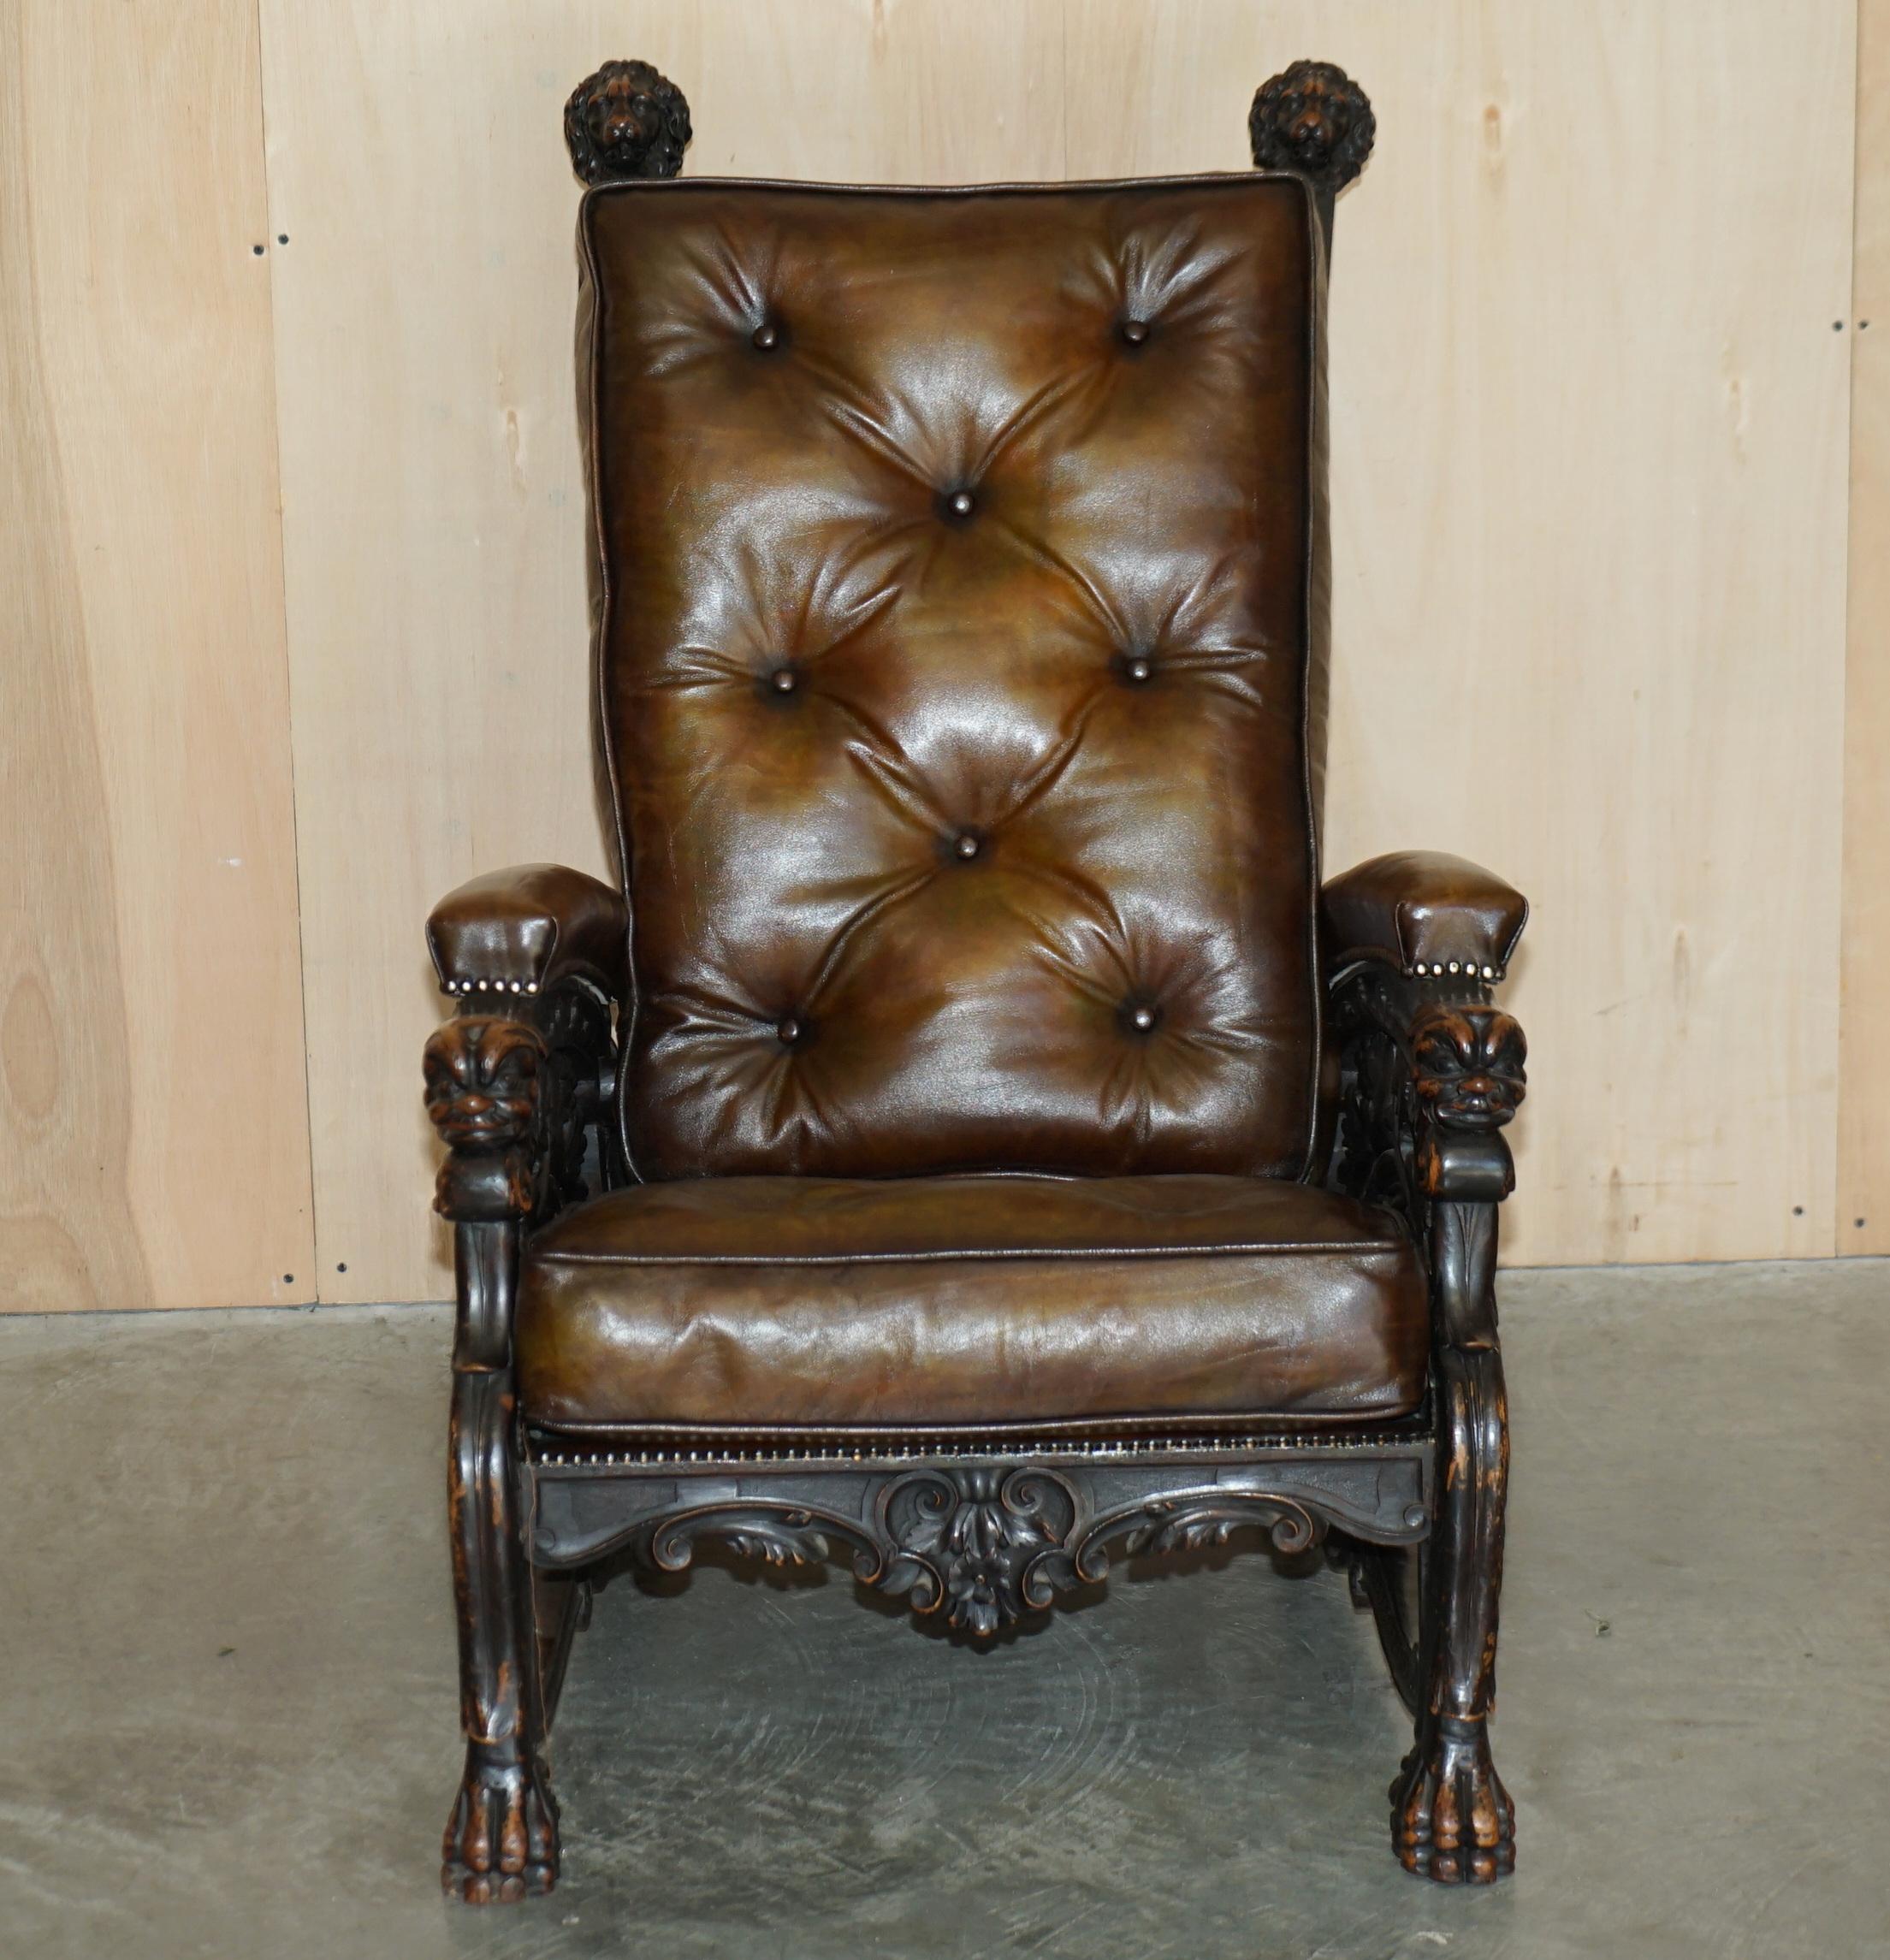 We are delighted to offer for sale this important, museum quality, hand carved, fully restored, antique Victorian library reading recliner armchair with new hand dyed Thomas Chippendale floating button leather cushions. 

This is truly an amazing